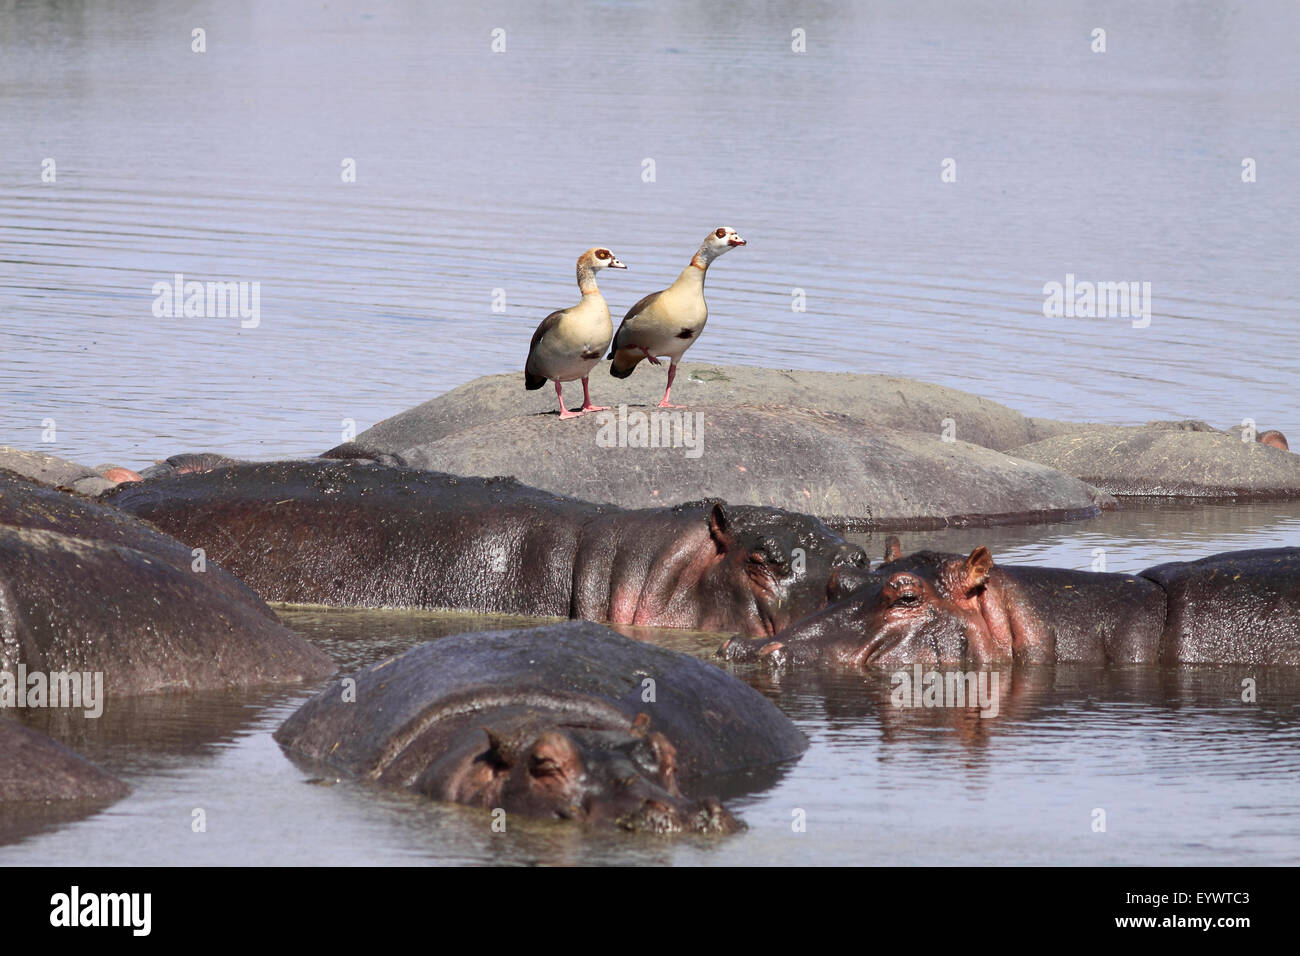 Hippos resting in water with Egyptian geese standing on one hippo's back, Ngorongoro Conservation Area, Tanzania, East Africa Stock Photo